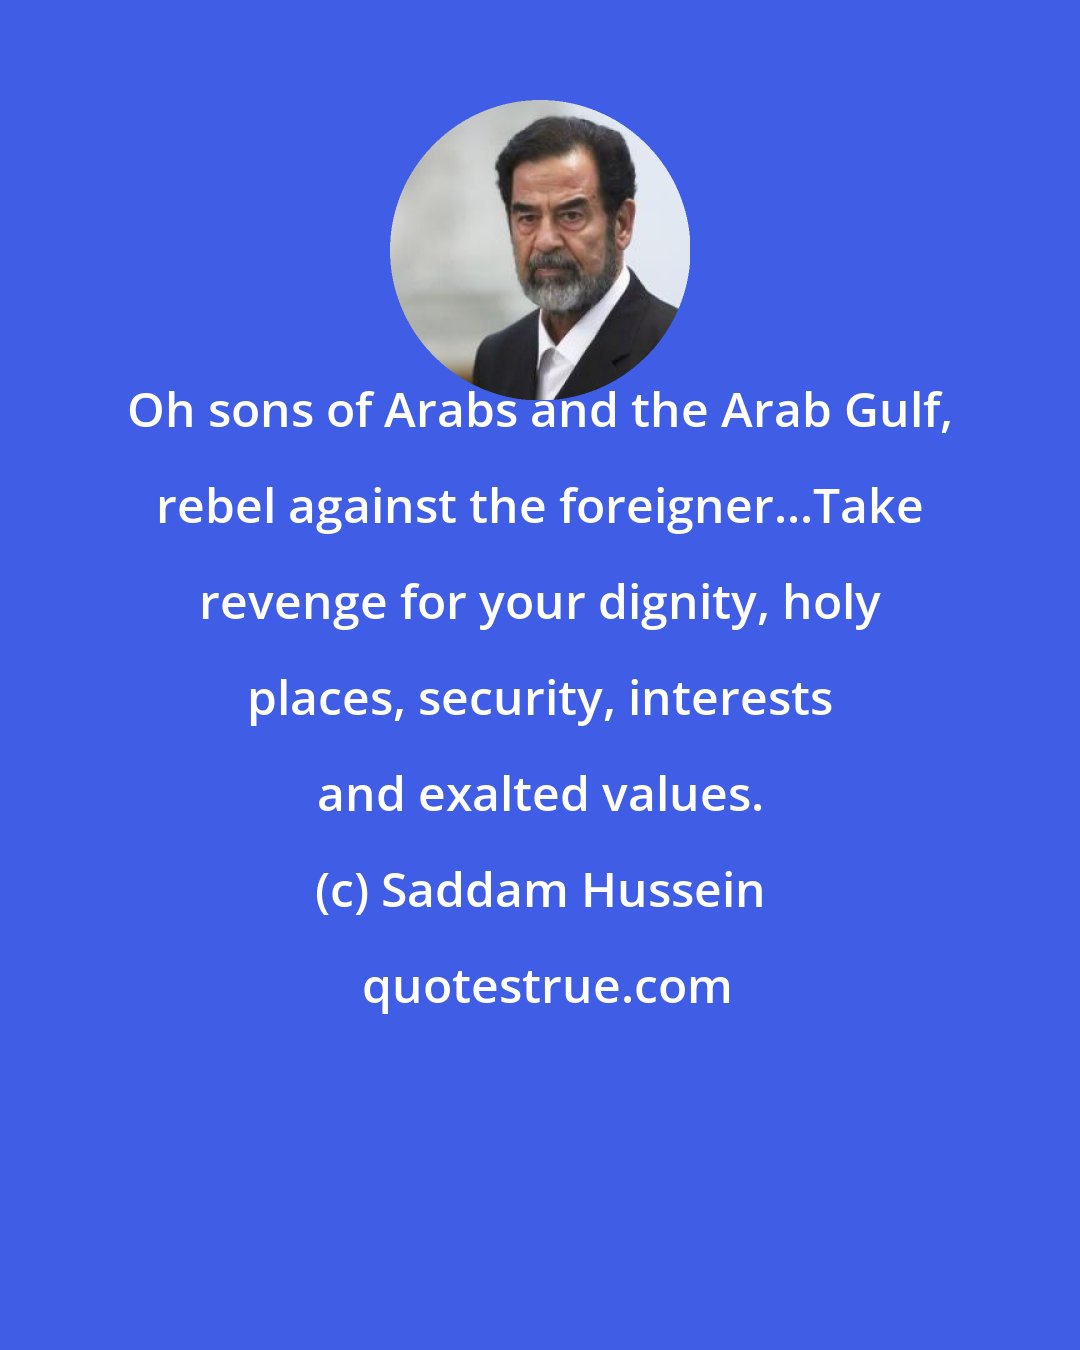 Saddam Hussein: Oh sons of Arabs and the Arab Gulf, rebel against the foreigner...Take revenge for your dignity, holy places, security, interests and exalted values.